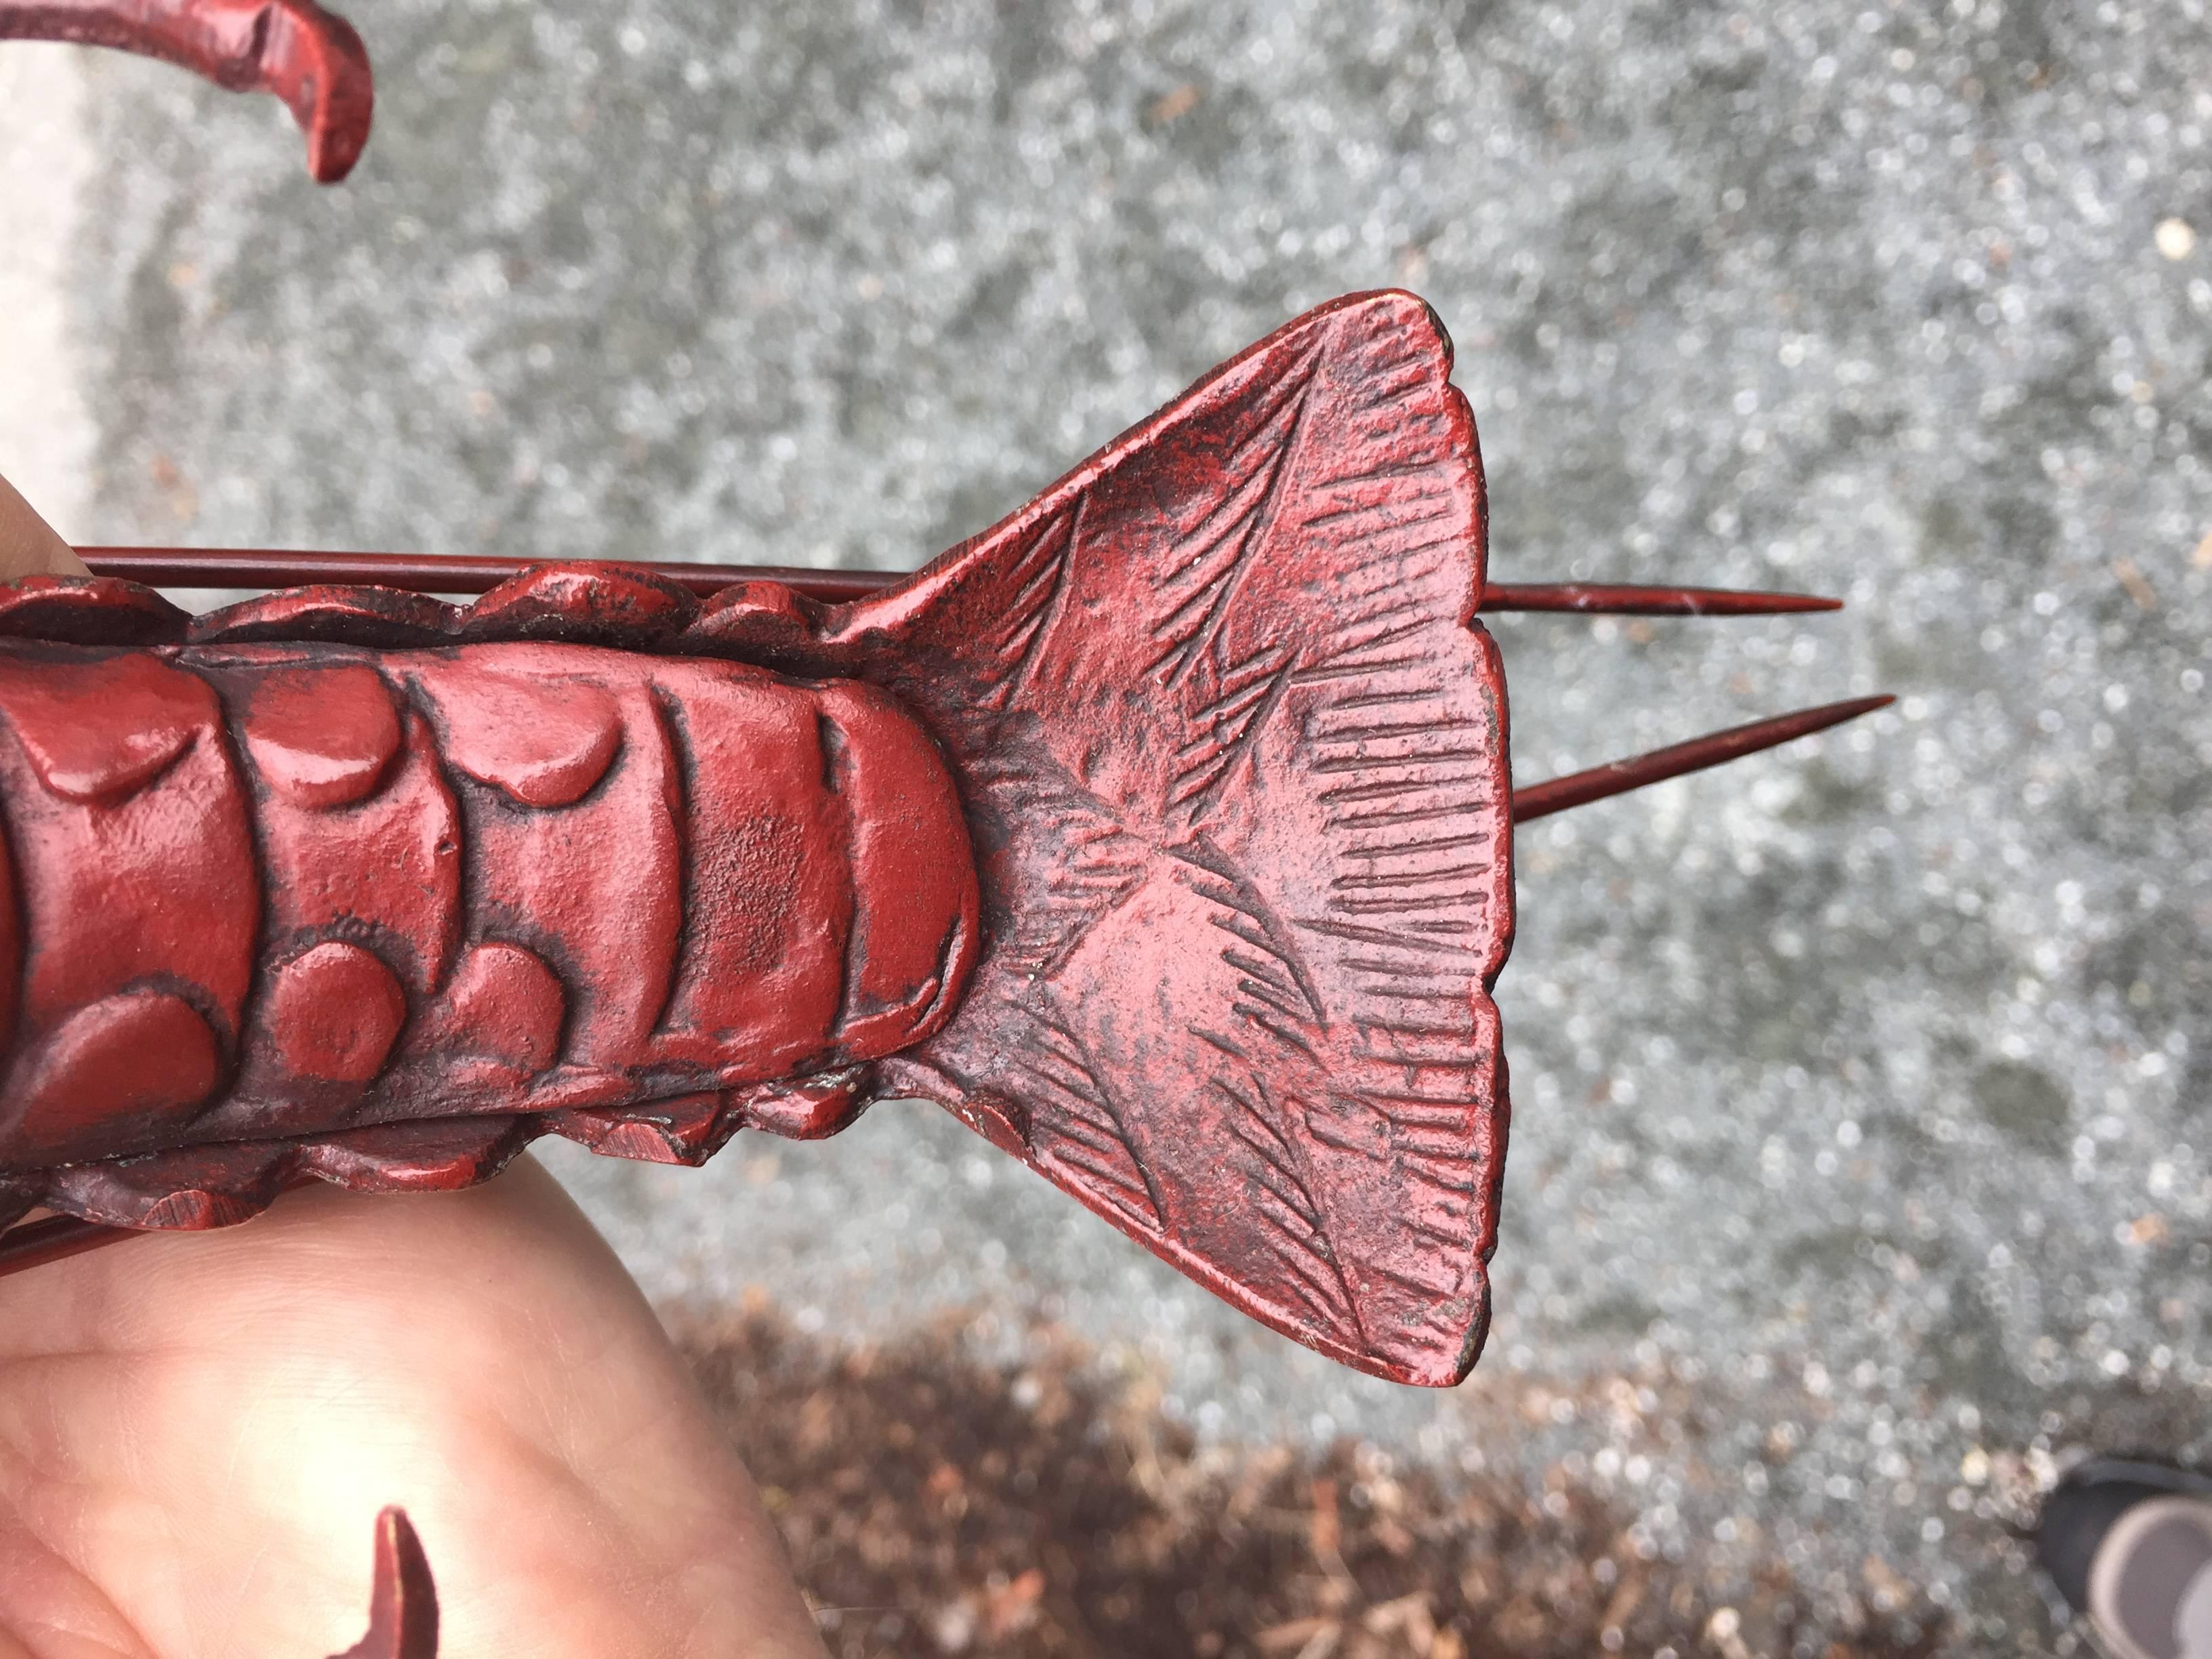 Japan Antique Jumbo Red Lobster Sculpture Realistic Best in Class  FREE SHIPPING 1